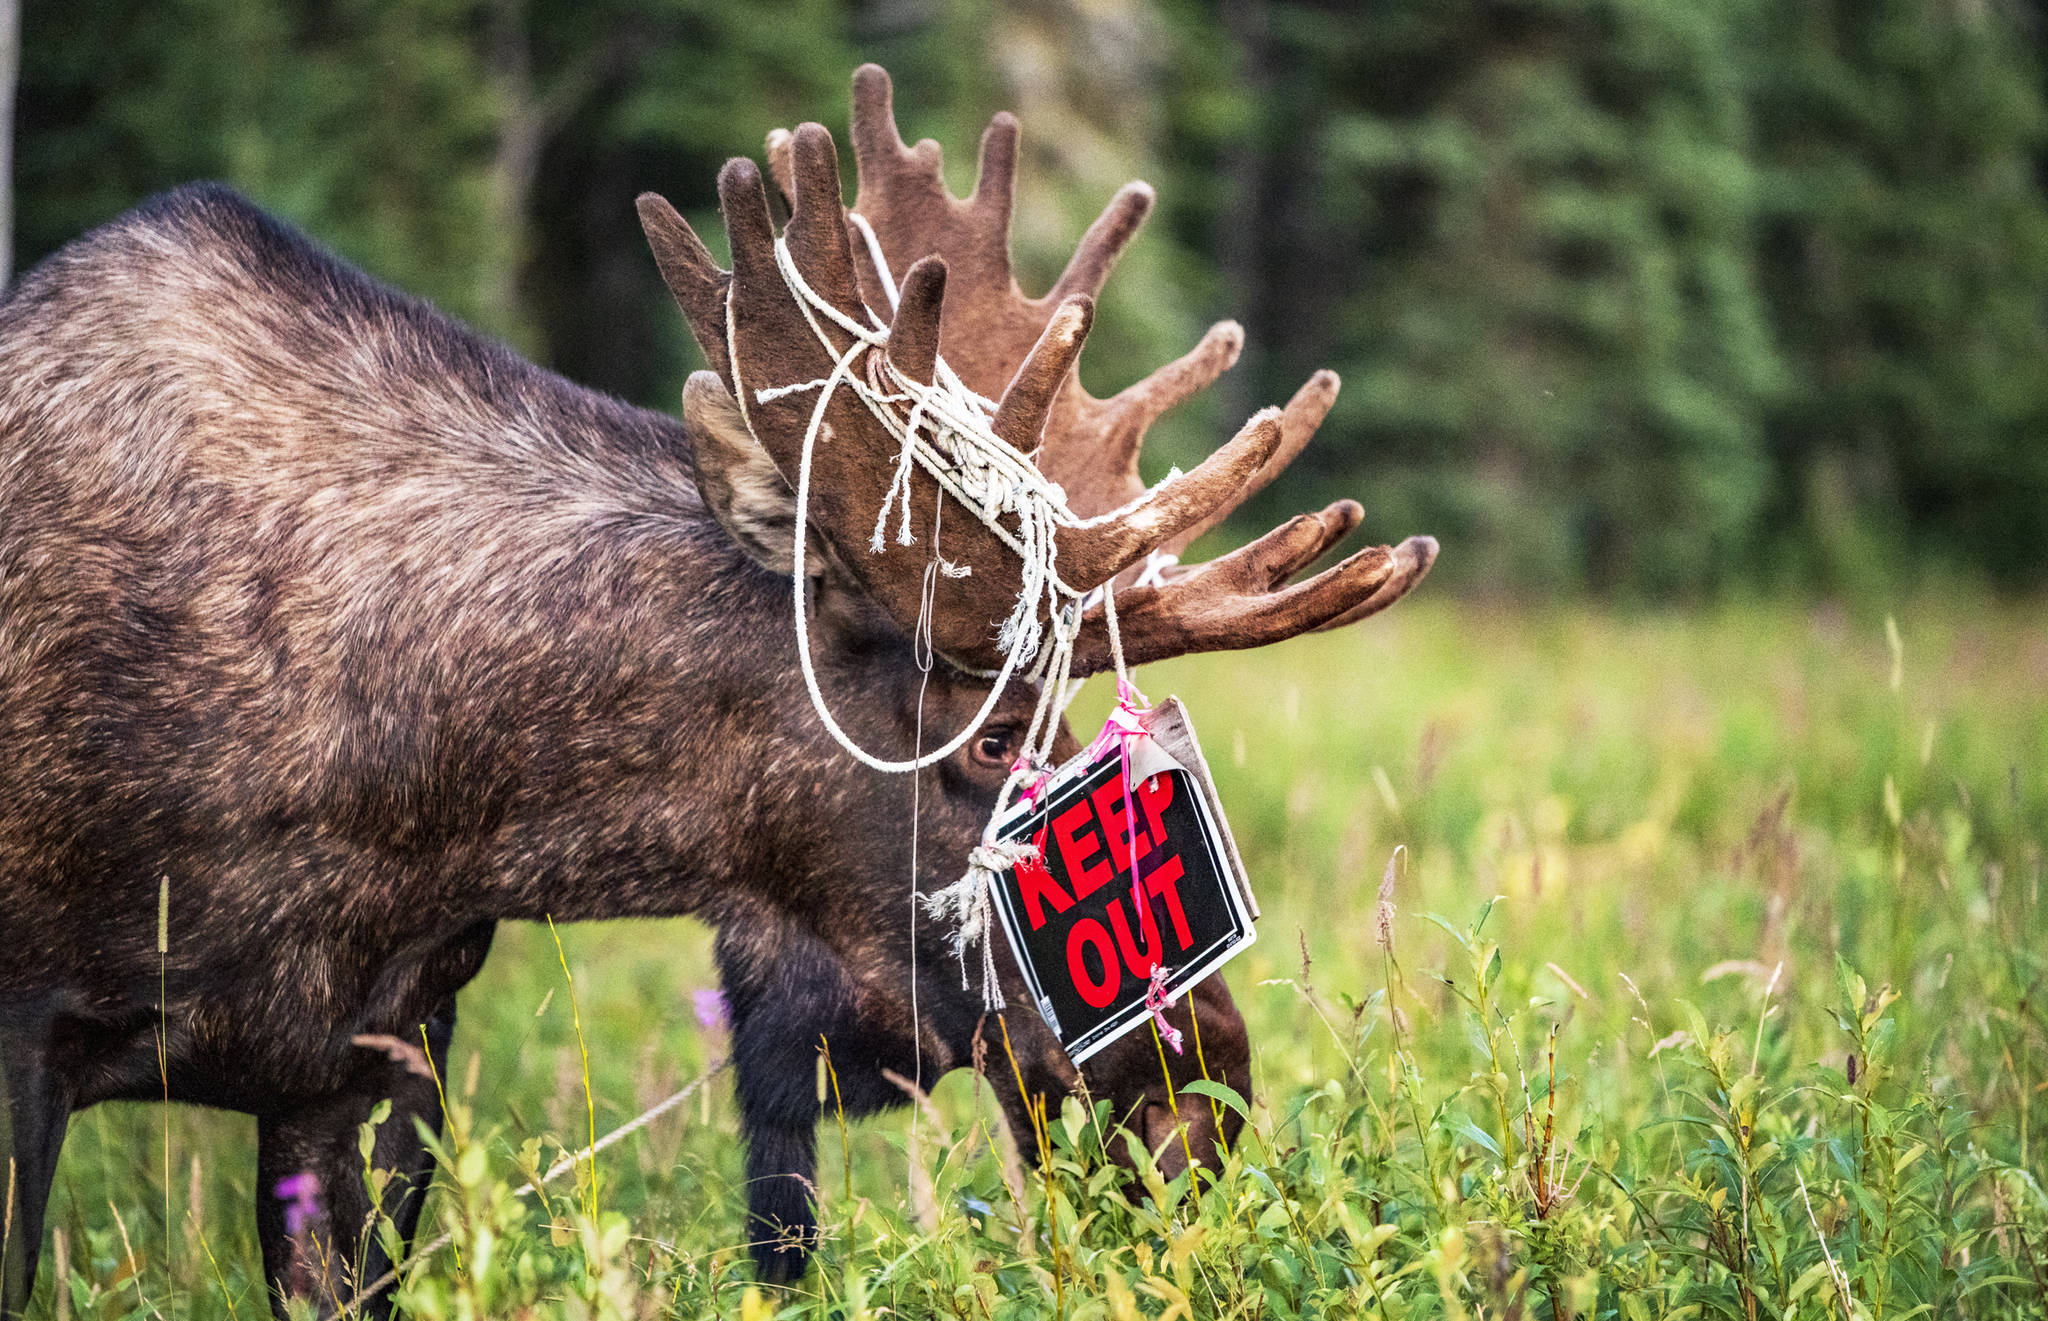 A bull moose munches on vegetation after making a quick job of someone’s “Keep Out” sign in Kasilof, Alaska. (Photo courtesy Ed Marsh)